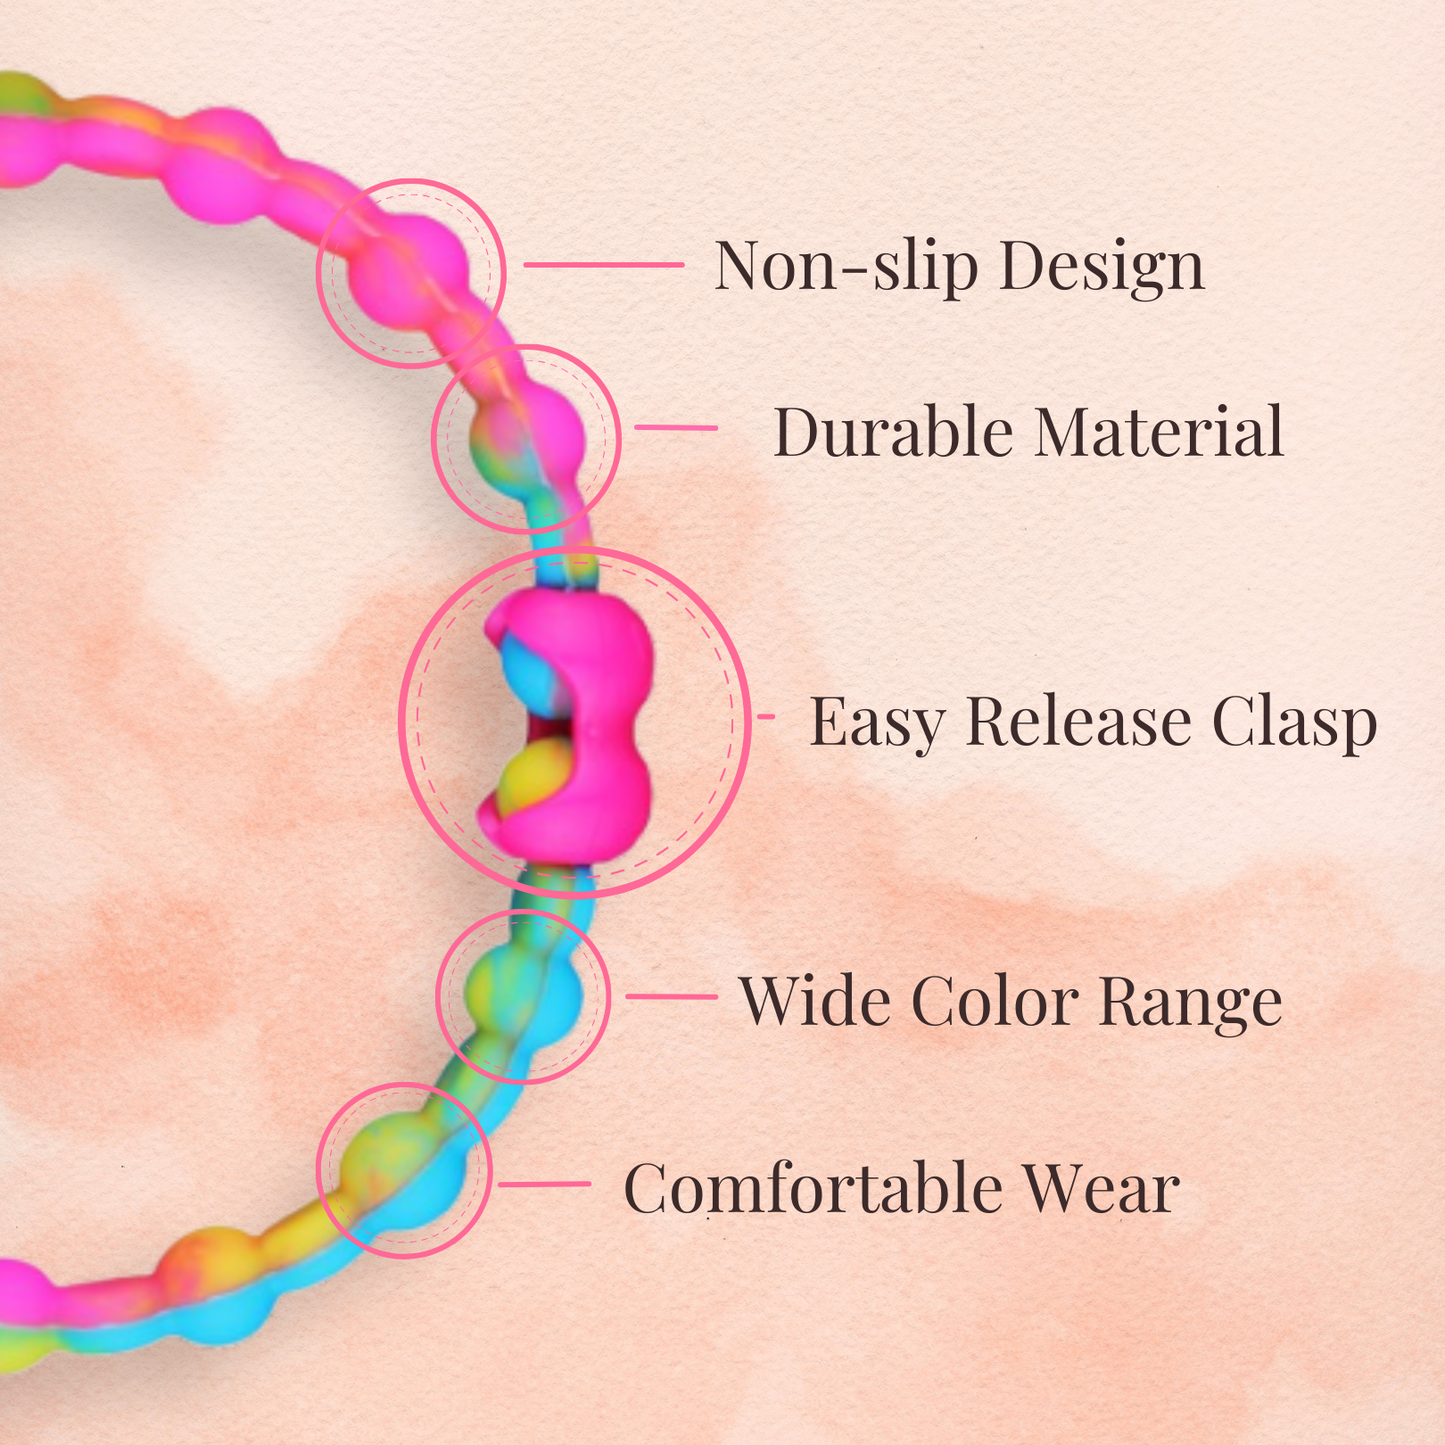 Polar Serenity Pack Hair Ties (8 Pack): A Cool Oasis for Every Look